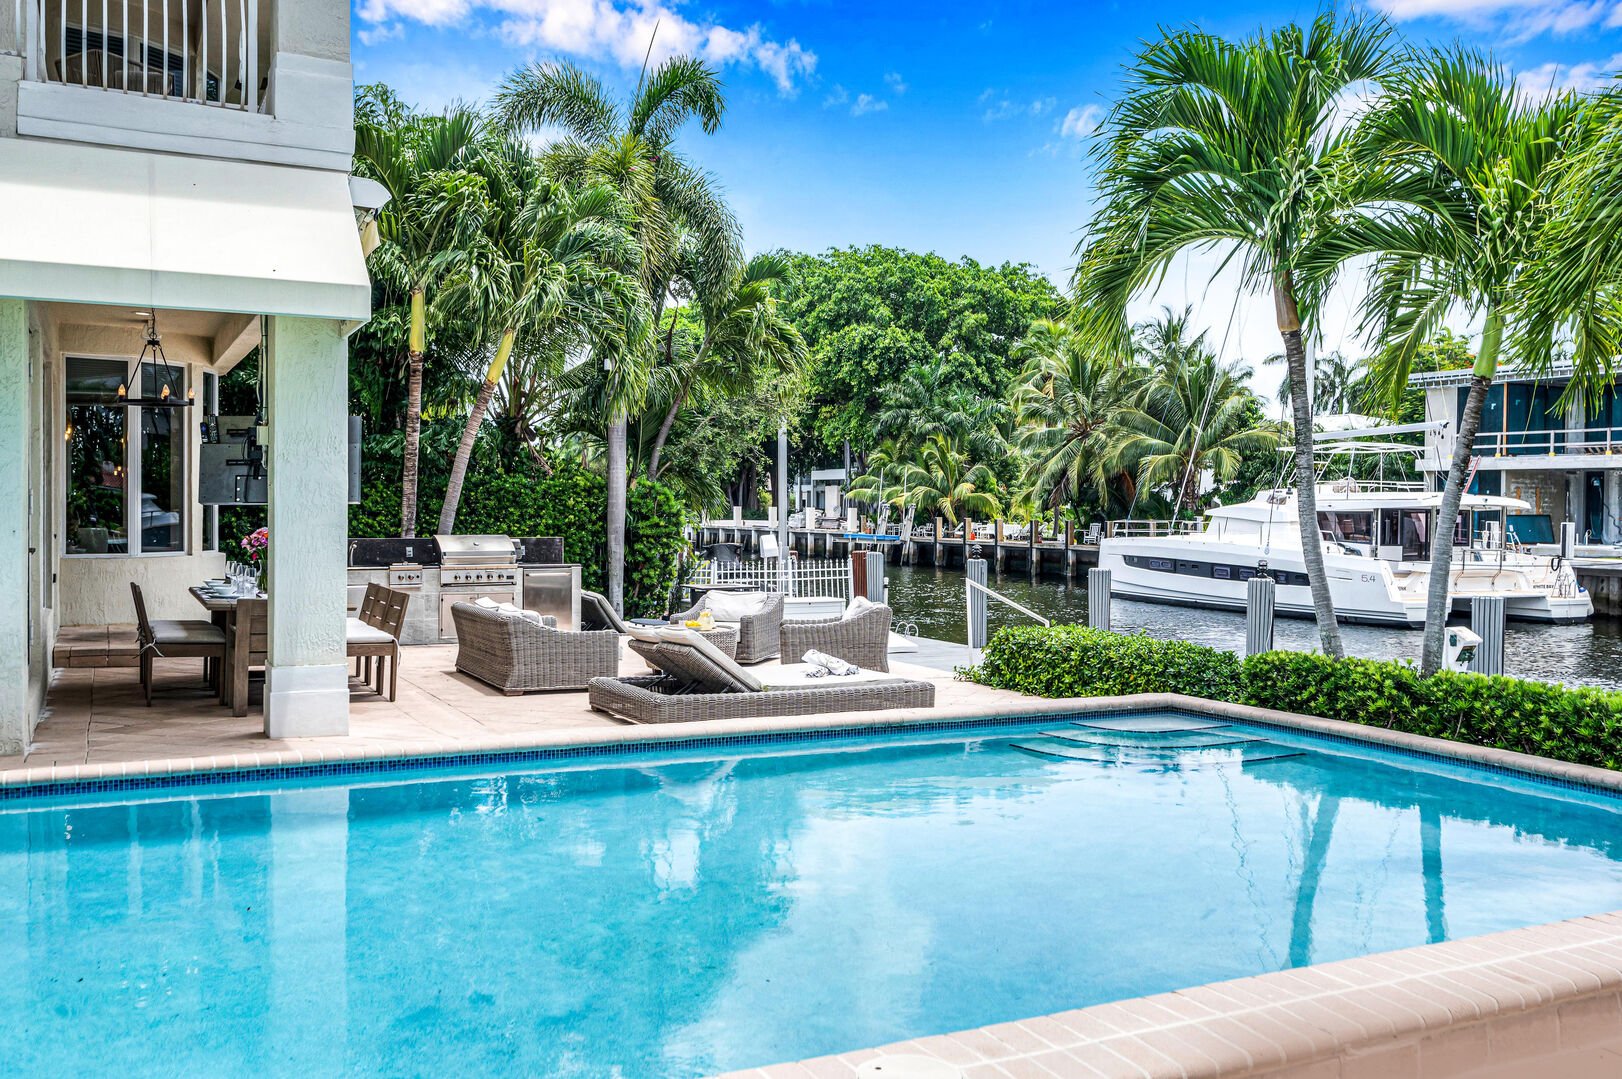 Relish in waterfront tranquility from the heated pool and lounge areas.